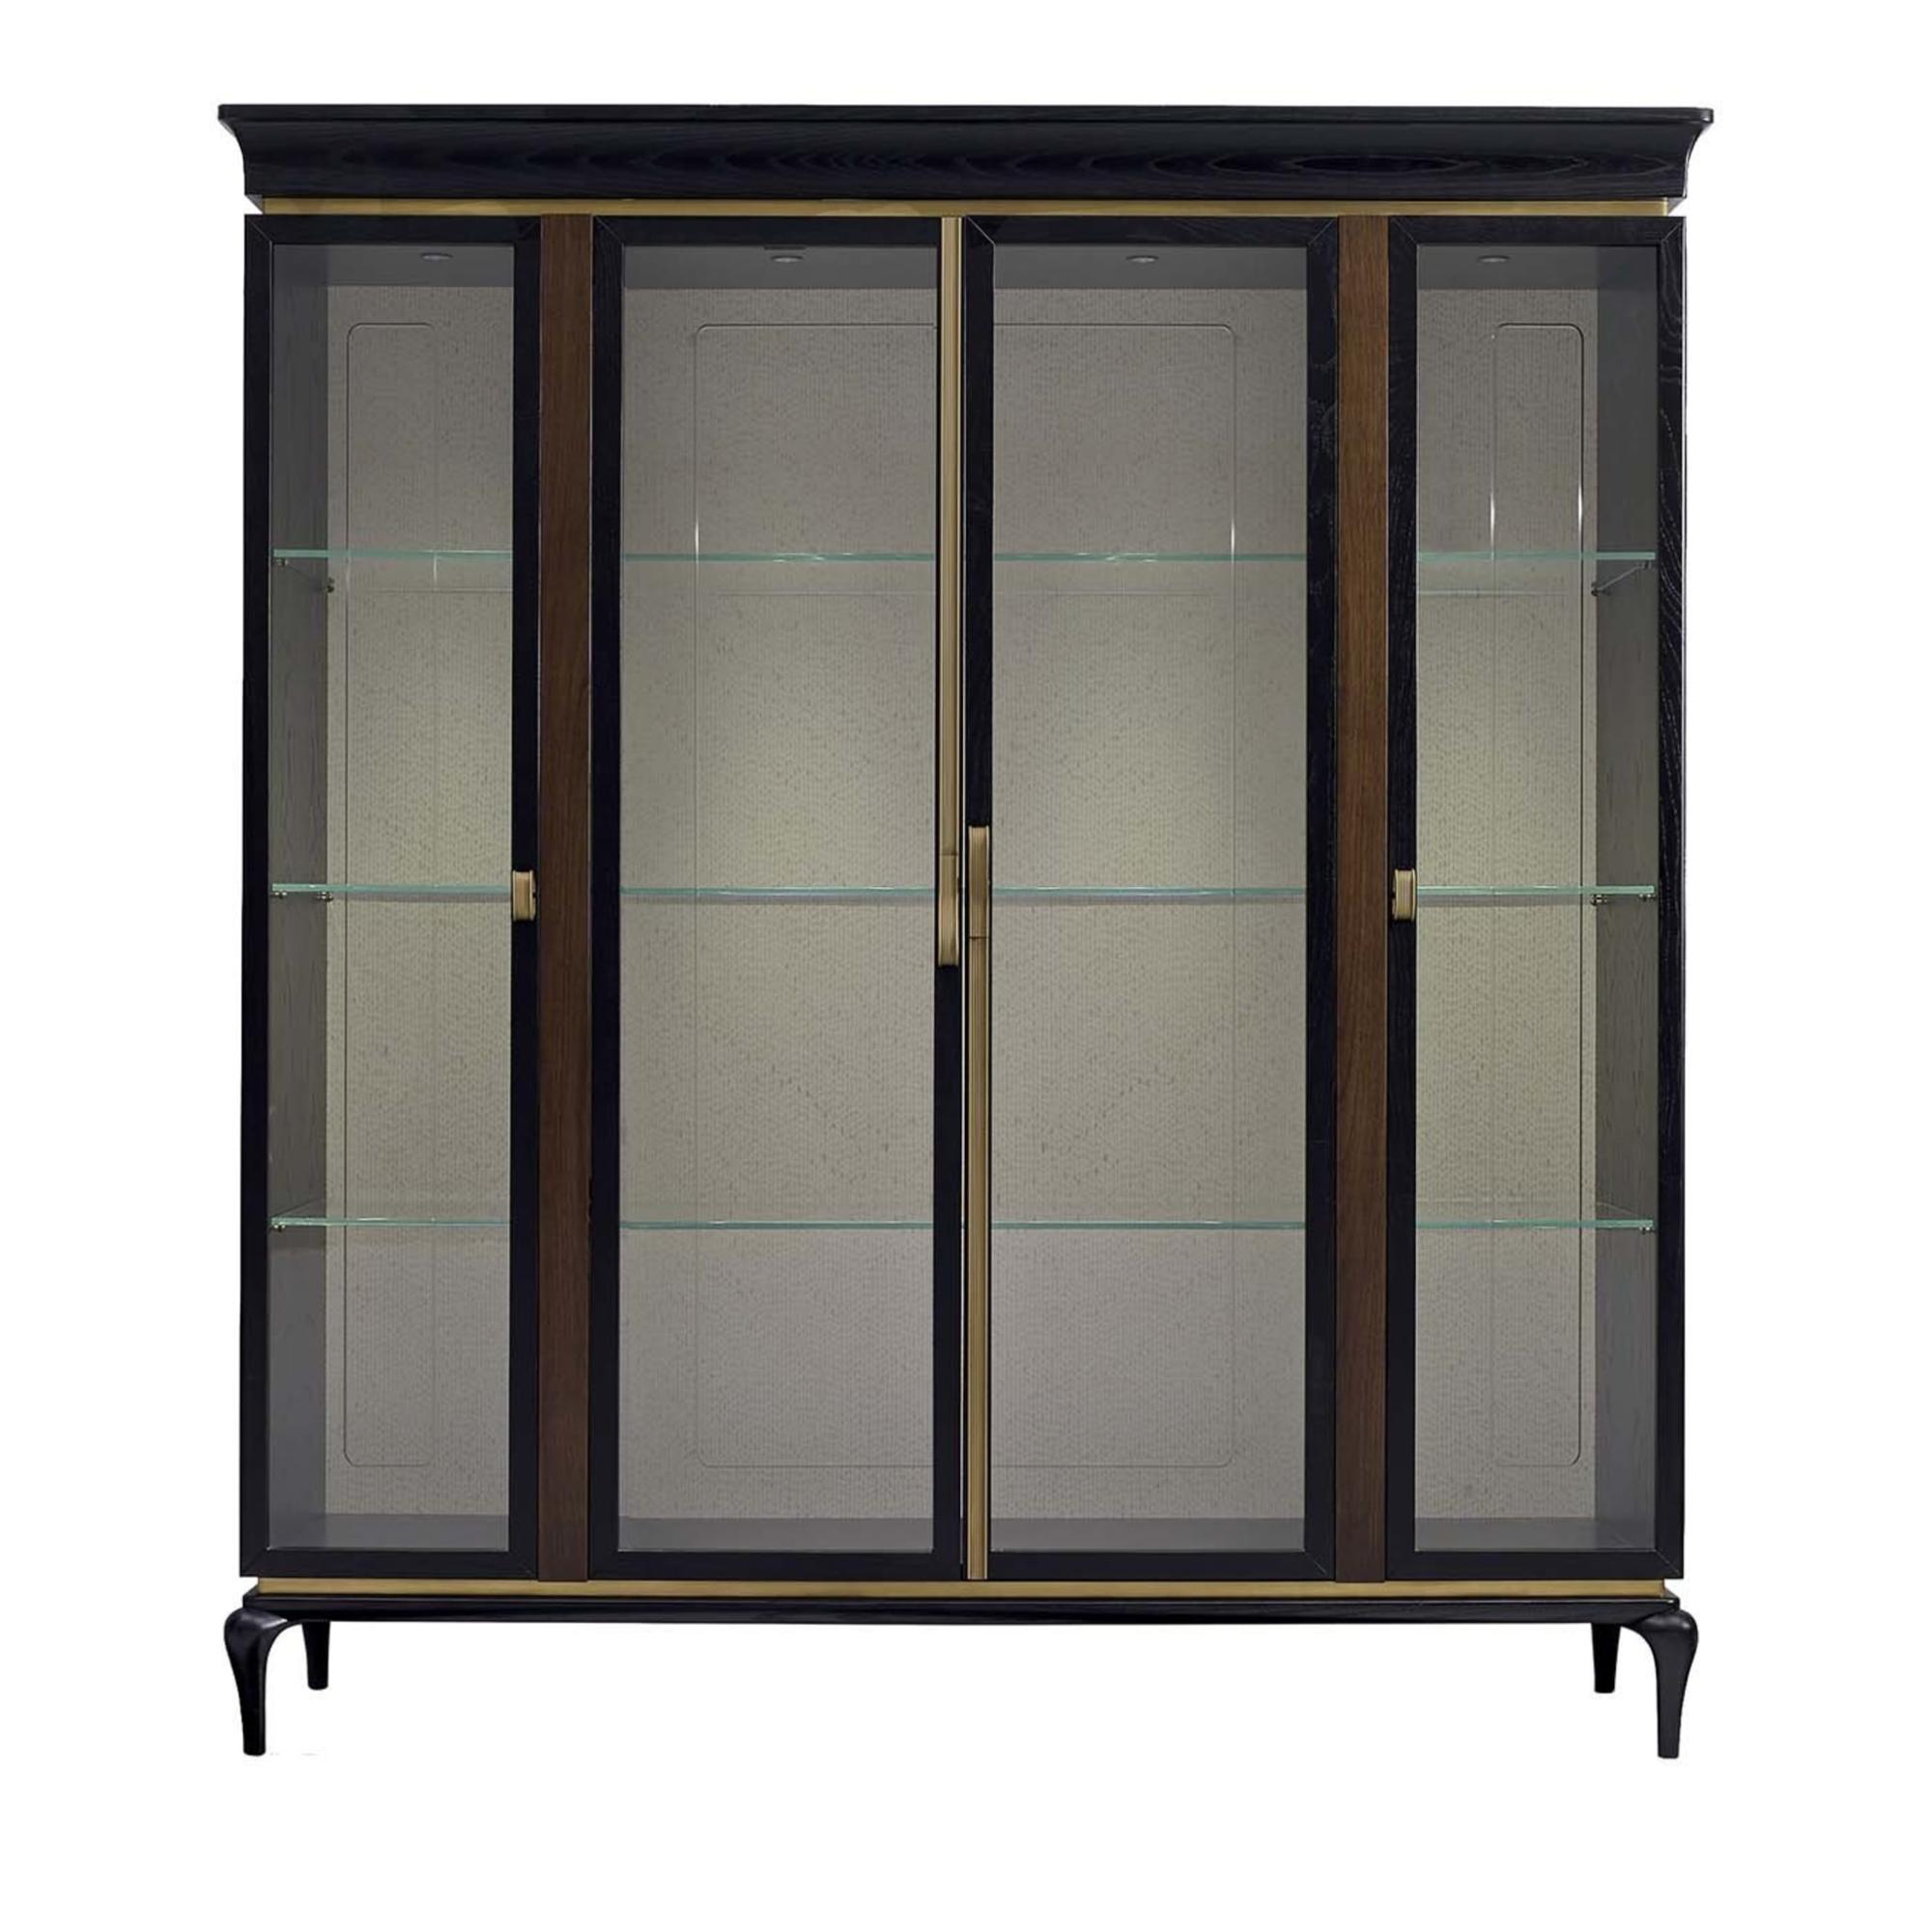 Dilan Crafted Cabinet